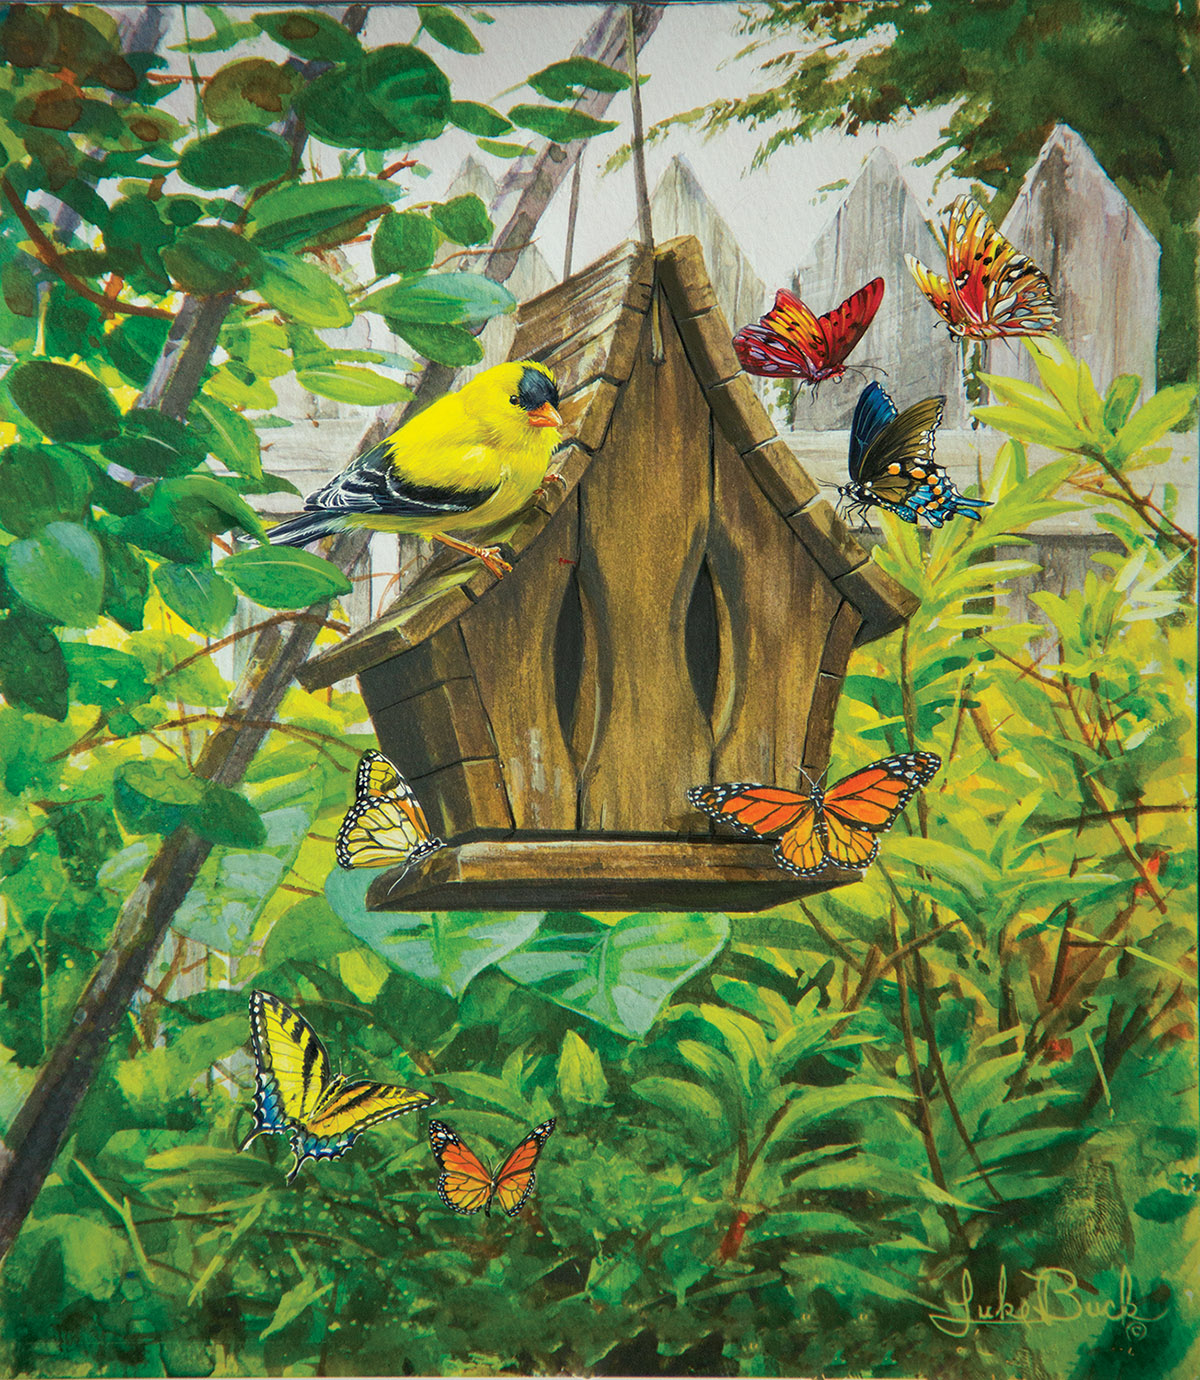 Songbird Collage Collage Jigsaw Puzzle By MasterPieces